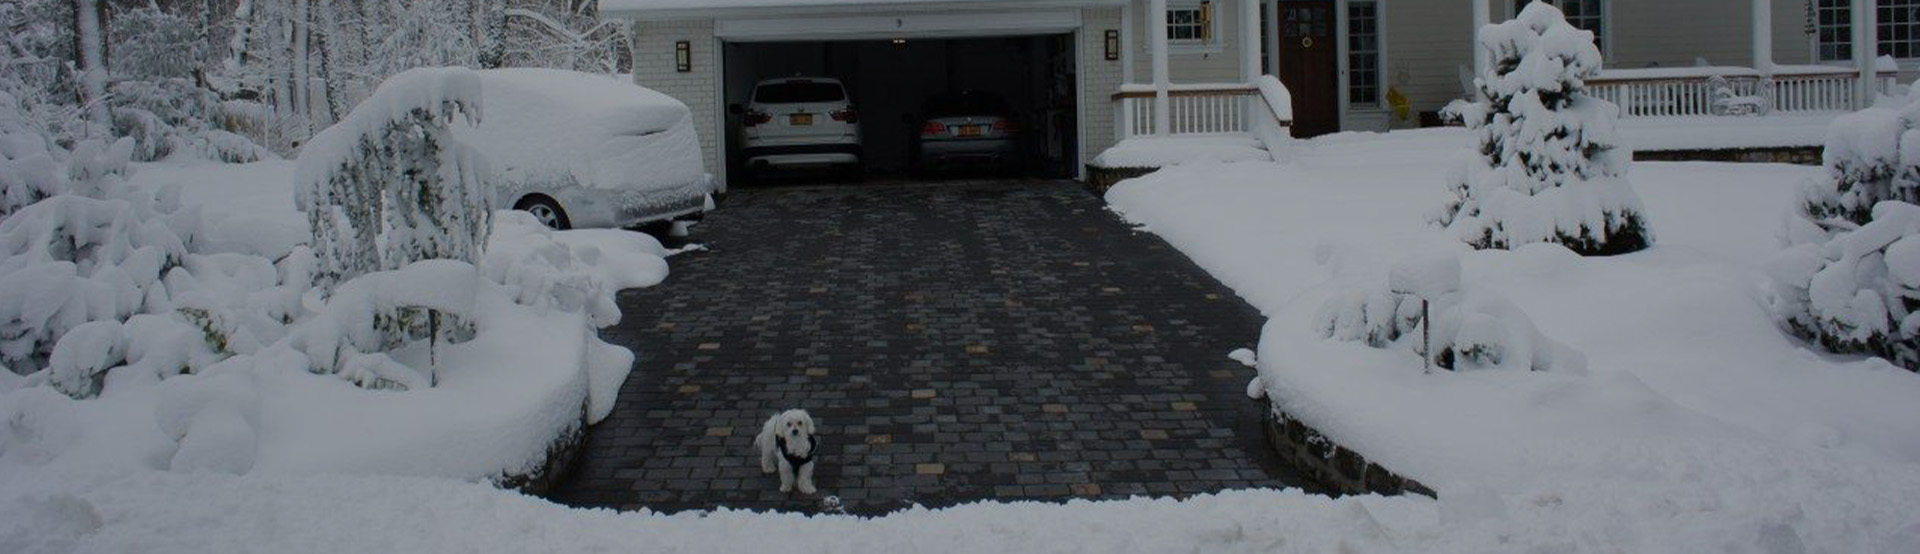 Heated paver driveway banner